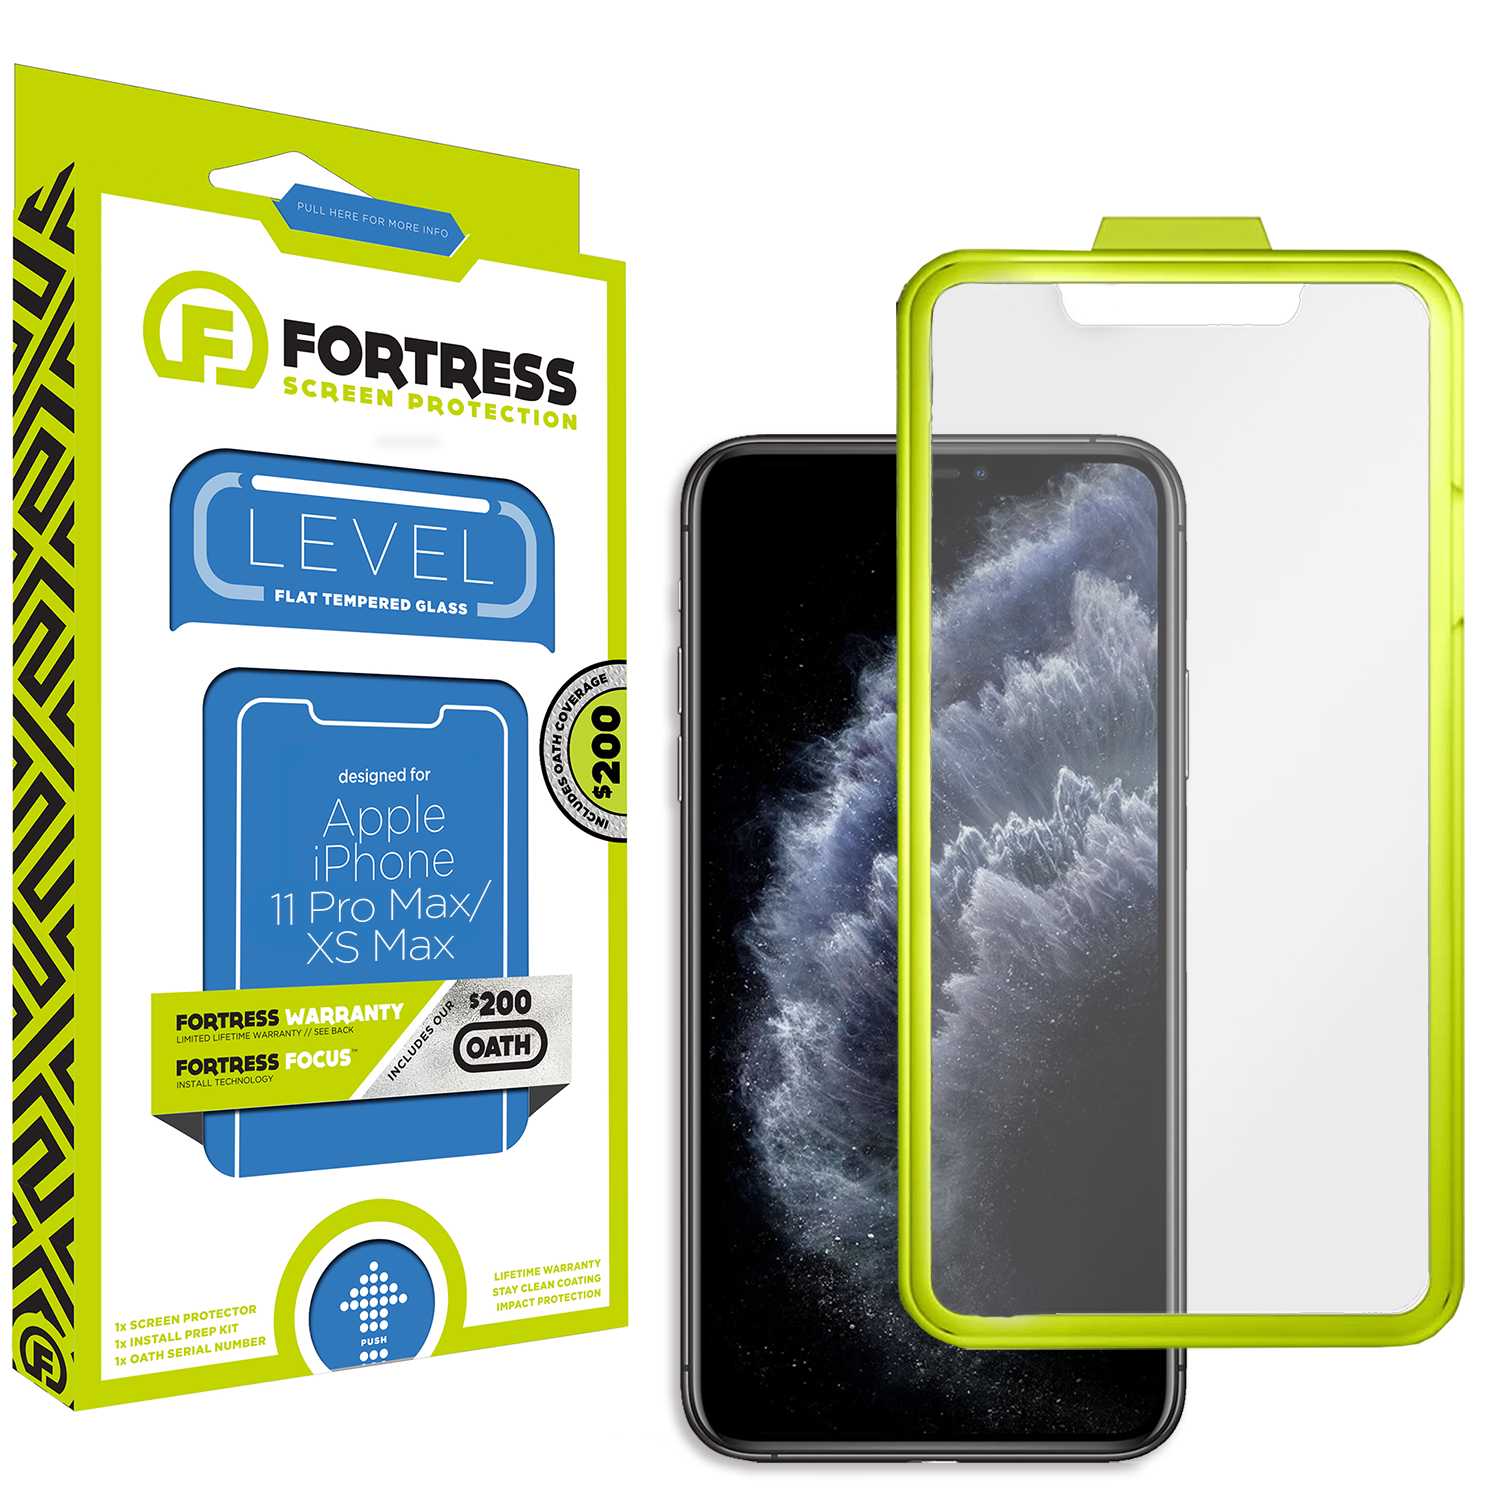 Fortress iPhone 11 Pro Max Screen Protector $200CoverageInstallTool Scooch Screen Protector